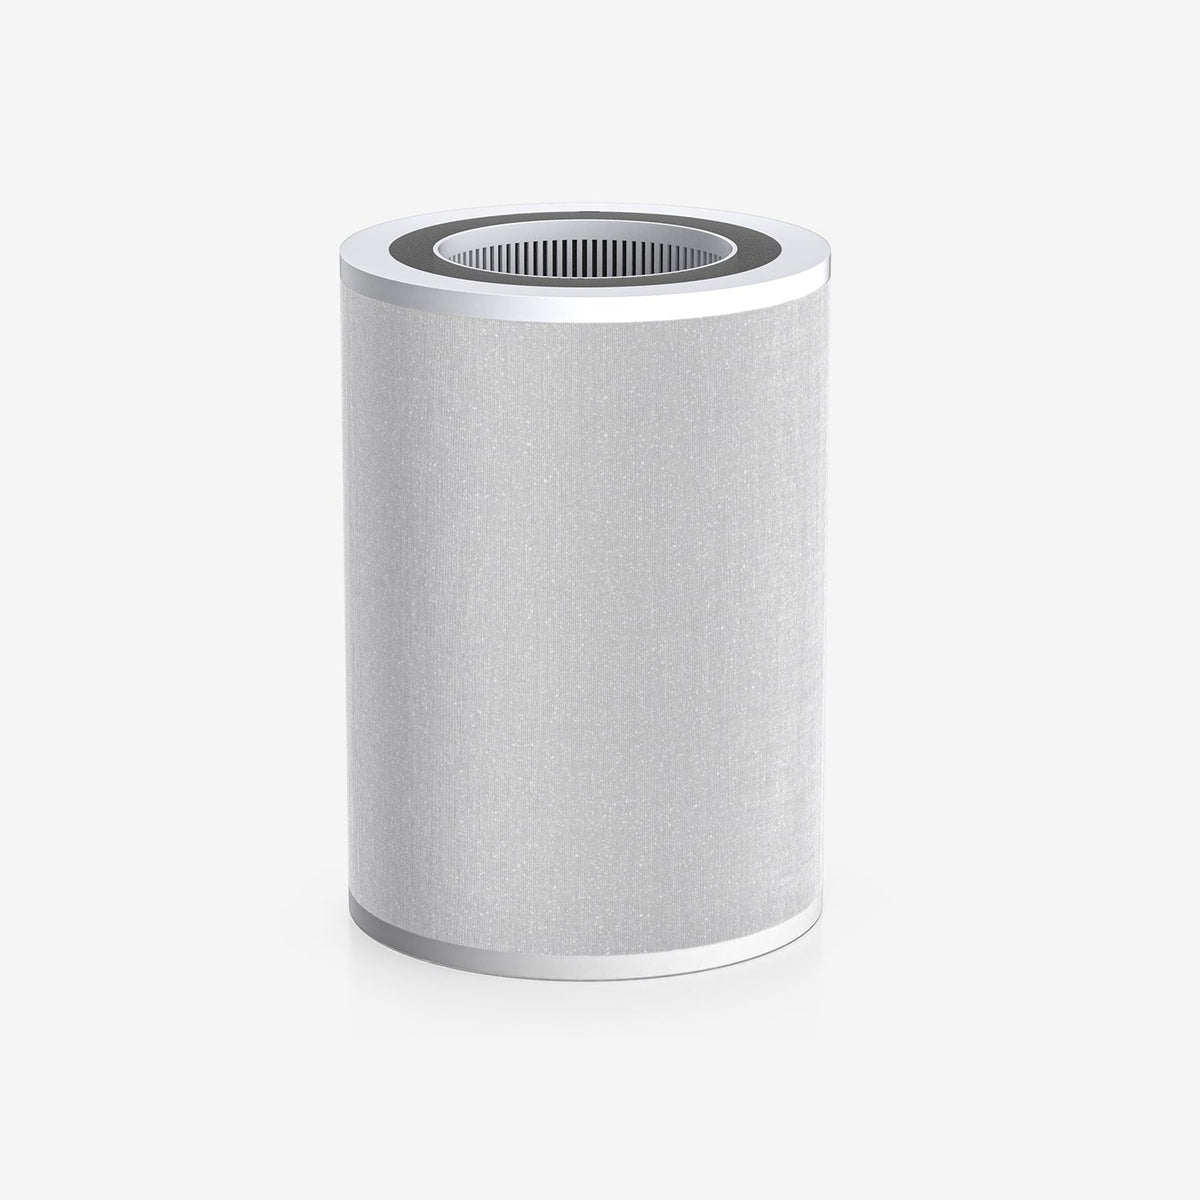 Replacement Filter for the Ultra Powerful Air Purifier